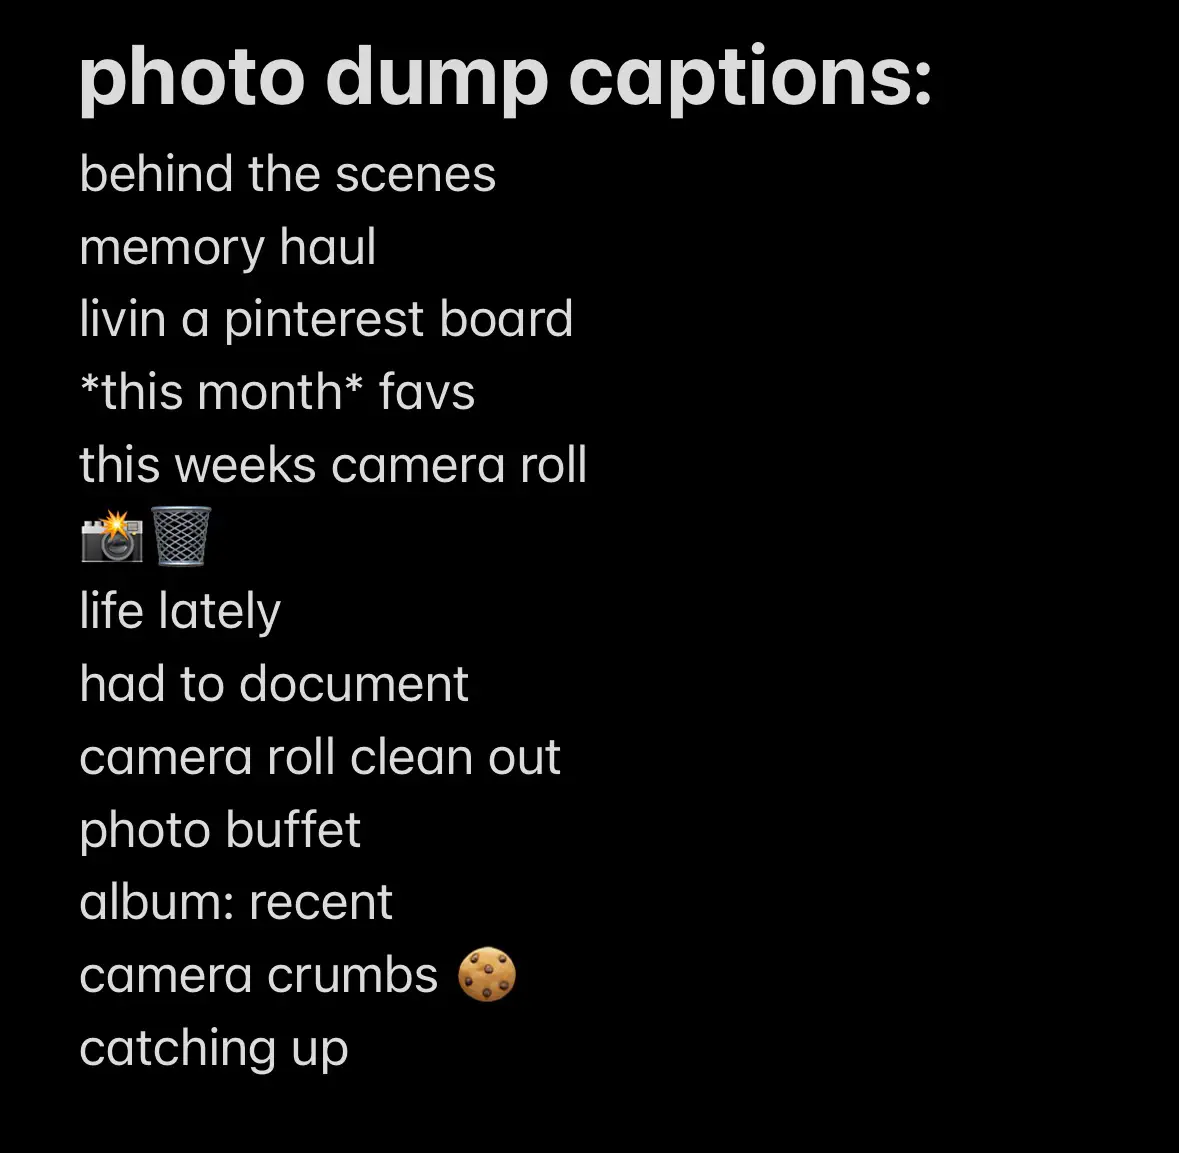  A list of things to document